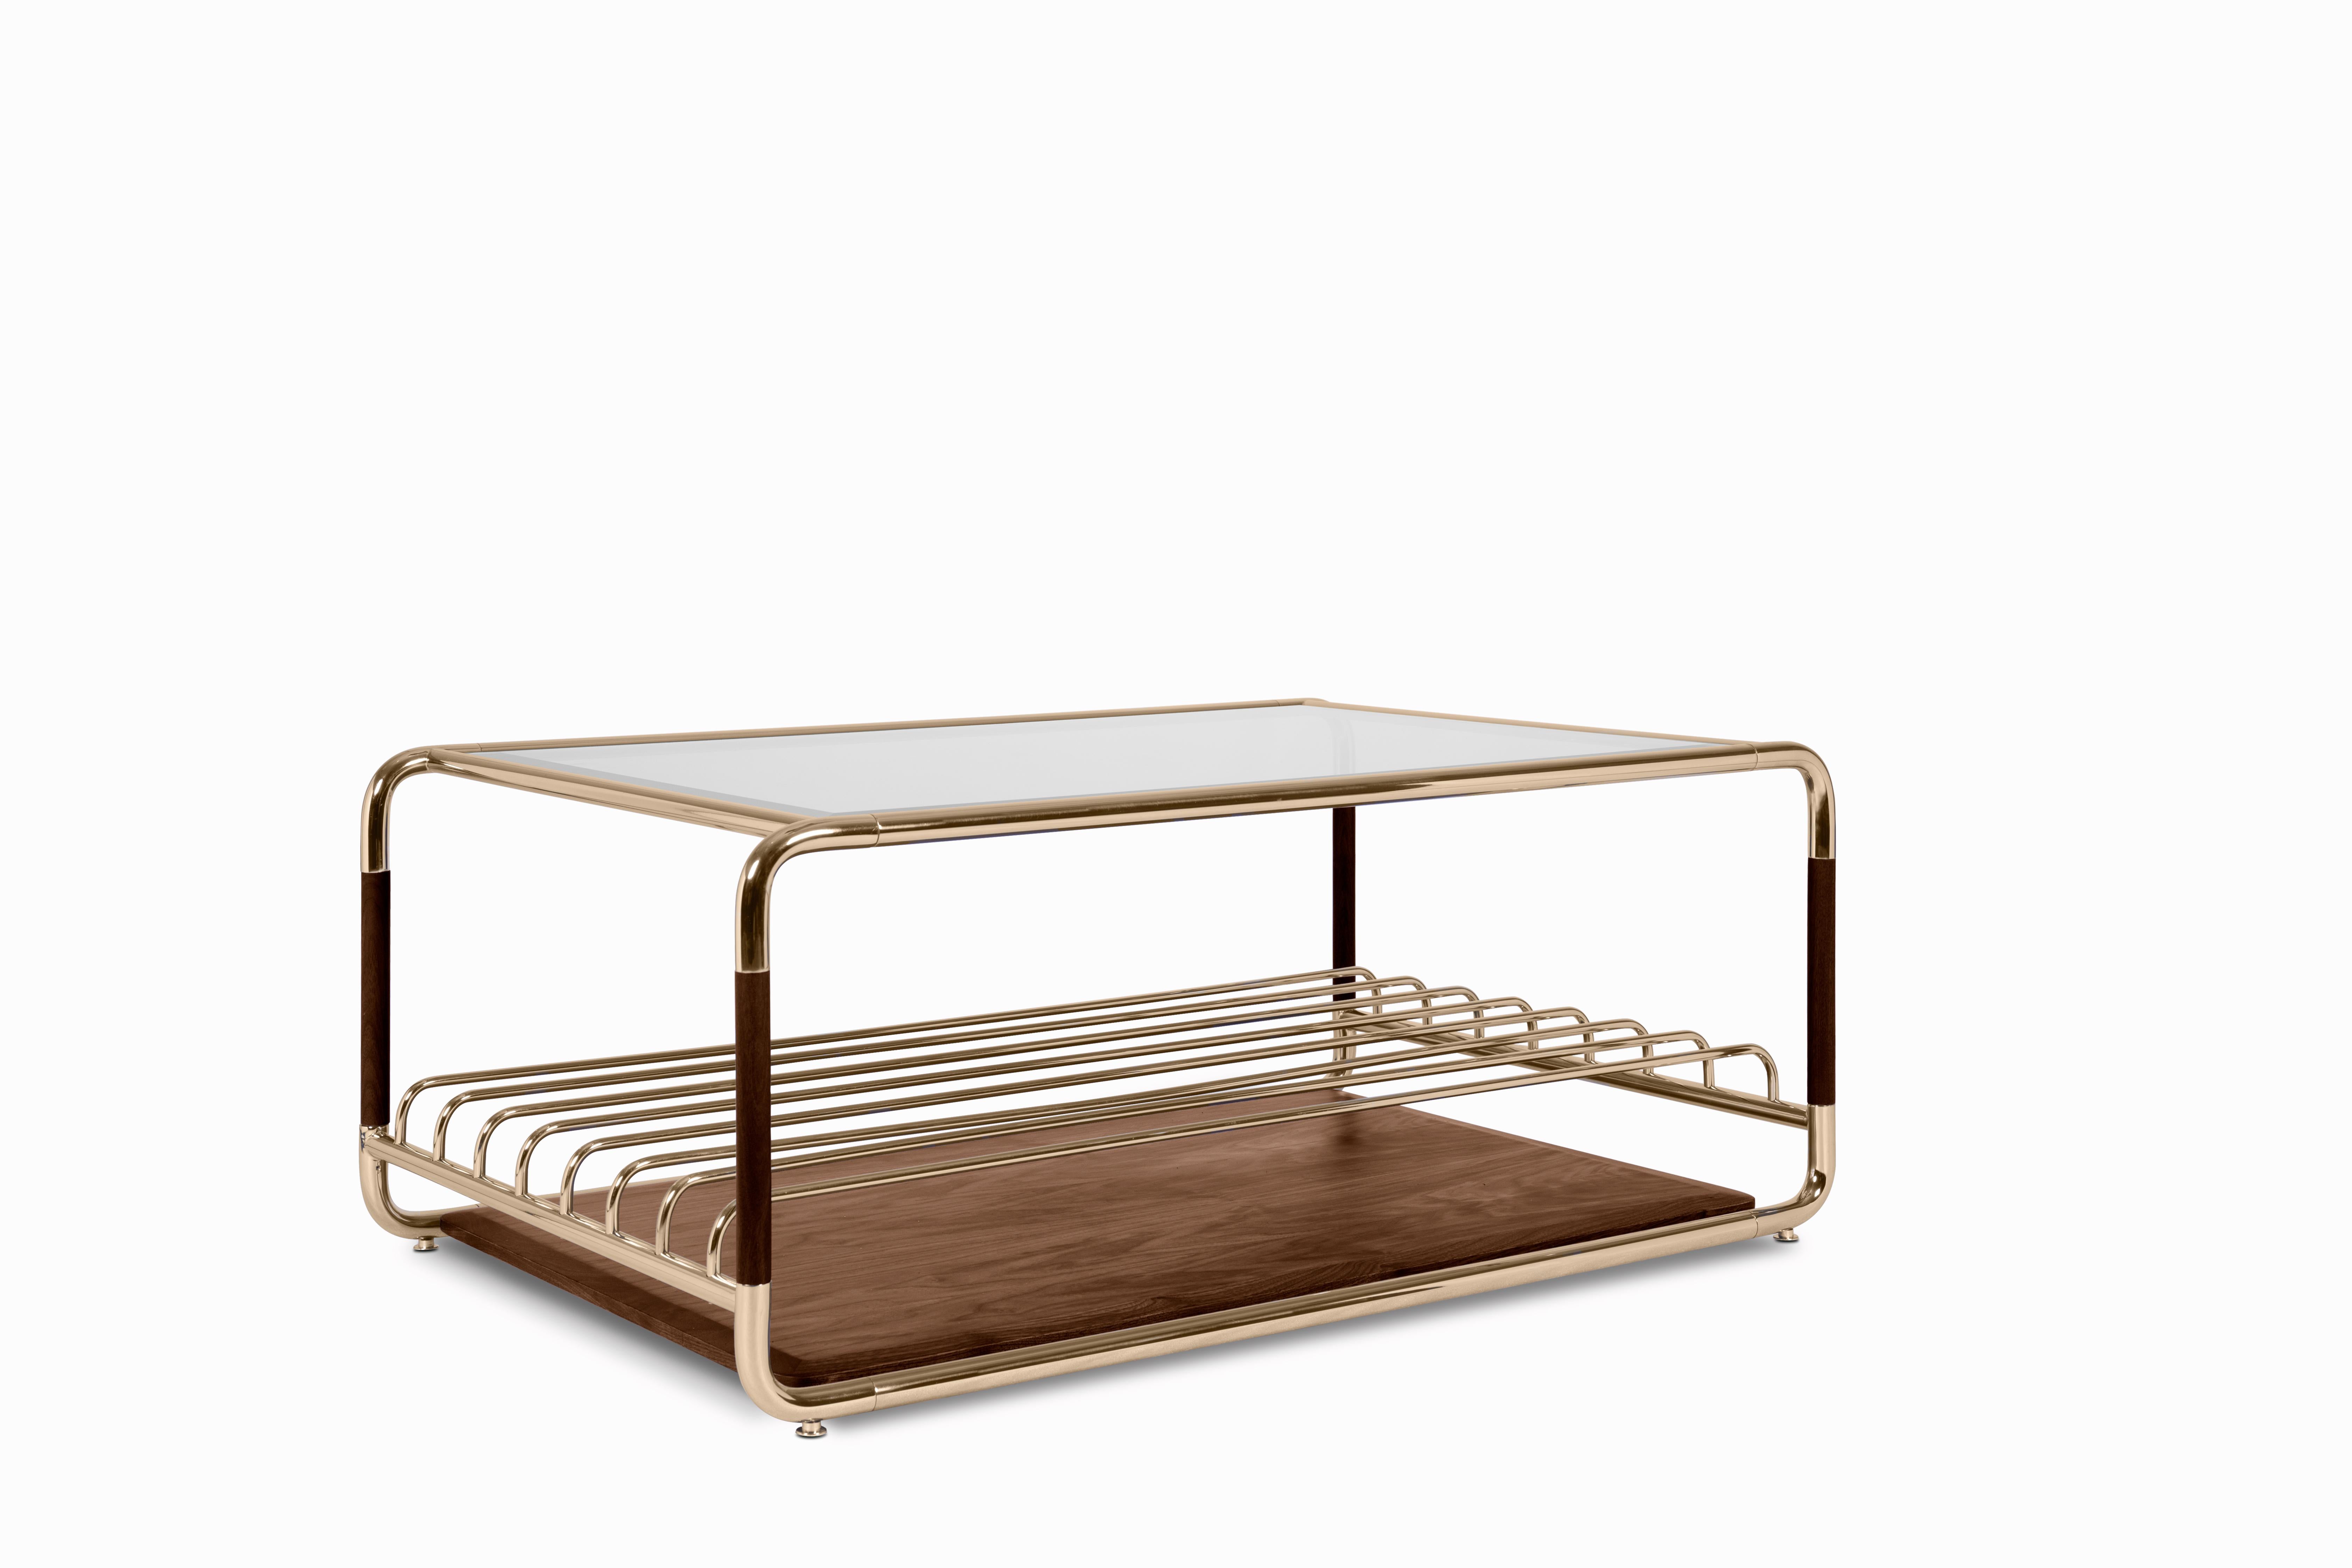 If there was ever an architect who deserved a show in an art museum, it is John Lautner. As a tribute to his cultural impact we named this center table Lautner. The mix between the brass structure and the walnut creates a sophisticated approach to